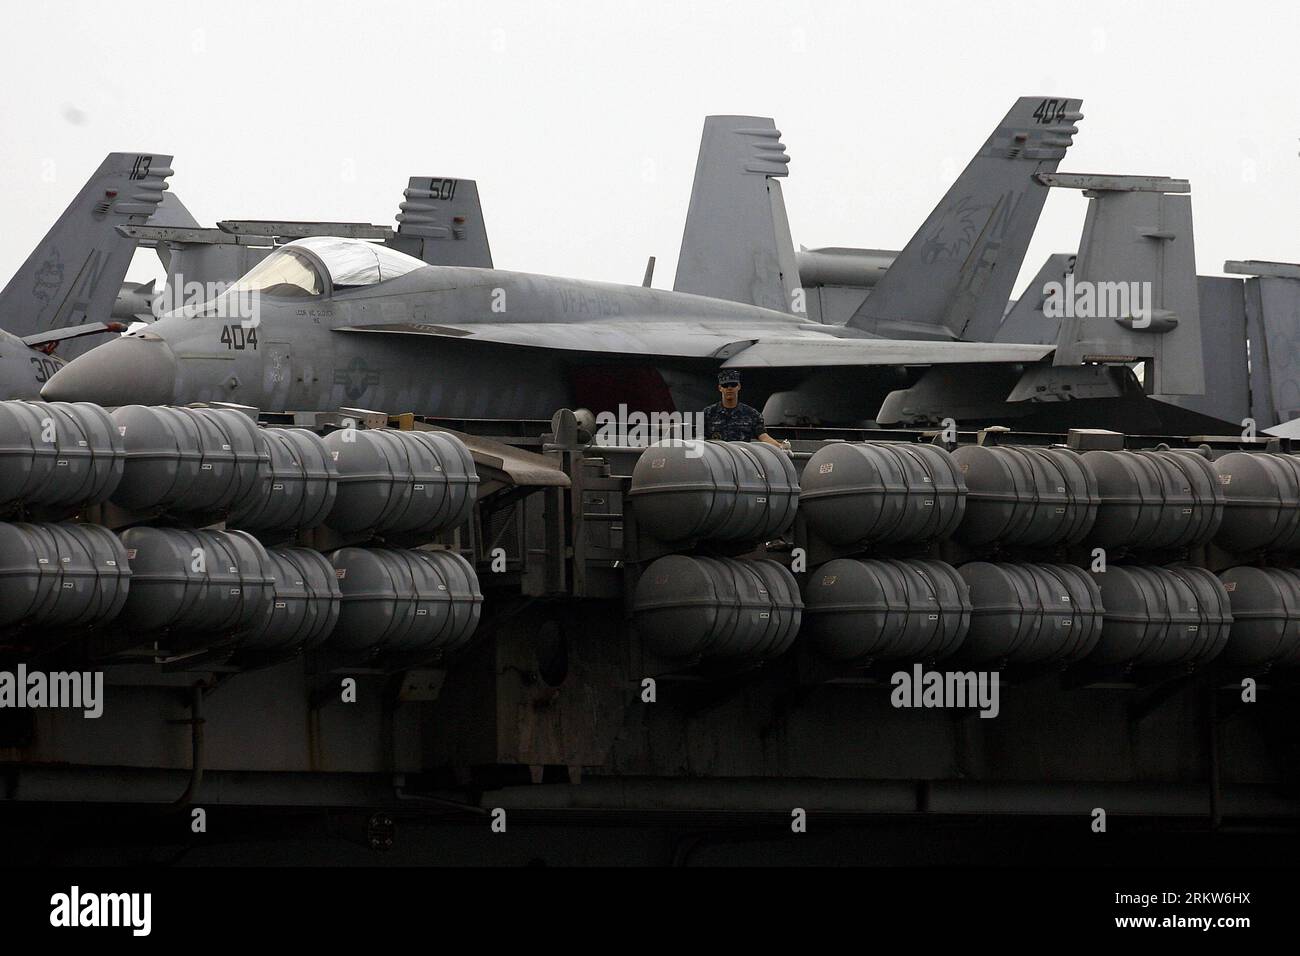 Bildnummer: 58624882  Datum: 24.10.2012  Copyright: imago/Xinhua (121024) -- MANILA, Oct. 24, 2012 (Xinhua) -- A U.S. navy soldier stands next to fighter jets on the U.S. aircraft carrier USS George Washington in the waters of the Manila Bay, Philippines, Oct. 24, 2012. The U.S. nuclear powered aircraft carrier USS George Washington arrived in the Philippines for professional exchanges between the U.S. and Philippine Navy counterparts. (Xinhua/Rouelle Umali)(ctt) PHILIPPINES-MANILA-USS GEORGE WASHINGTON PUBLICATIONxNOTxINxCHN Politik Militär Schiff Flugzeugträger Kriegsschiff xjh x0x 2012 quer Stock Photo